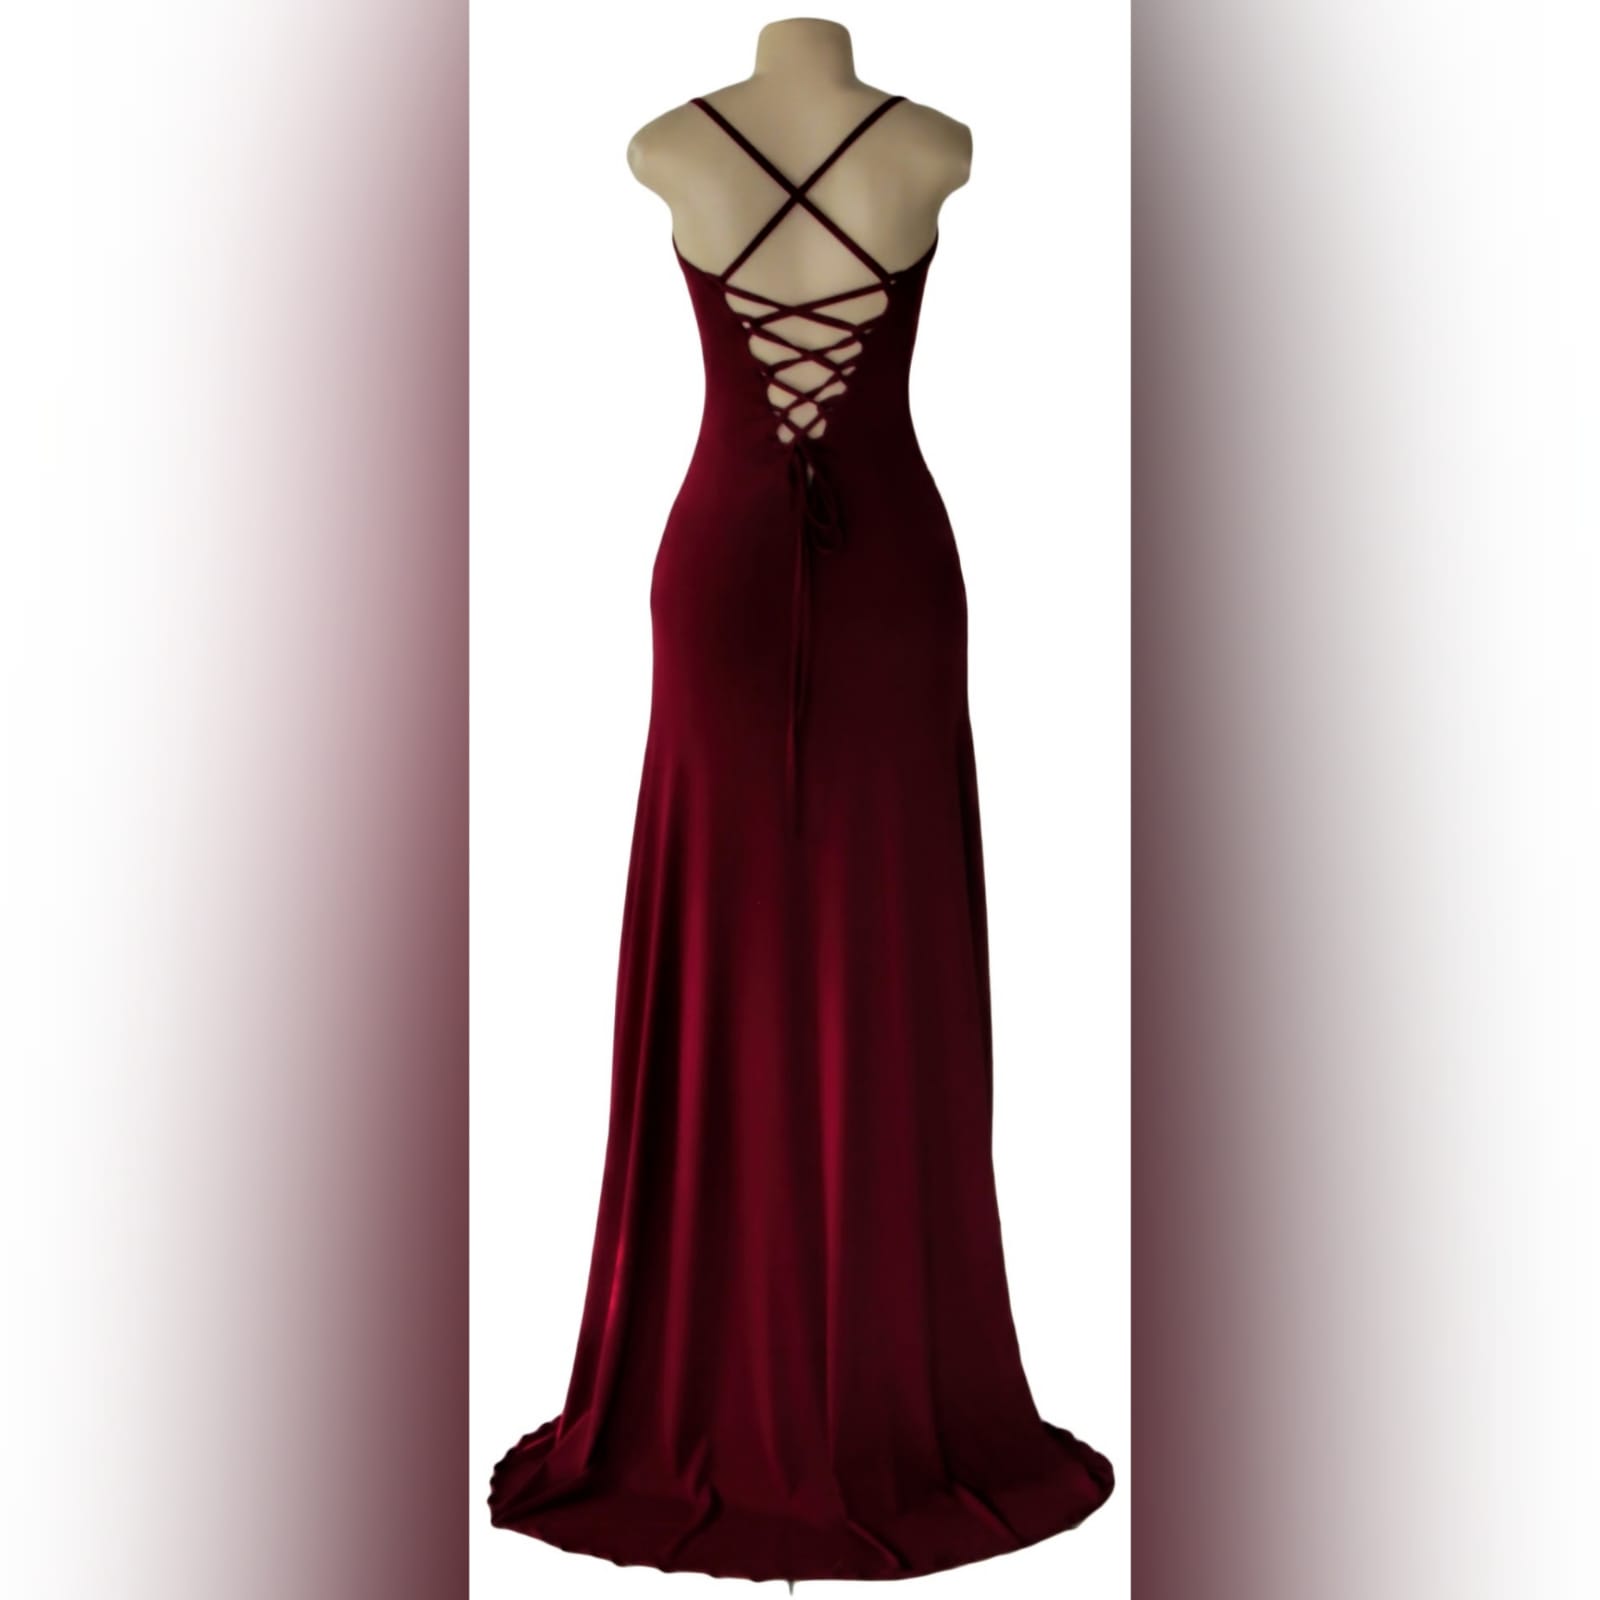 Maroon lace-up back long simple prom dress 3 maroon lace-up back long simple prom dress with thin shoulder straps, high slit and a small train. Lace-up back to adjust the fit.